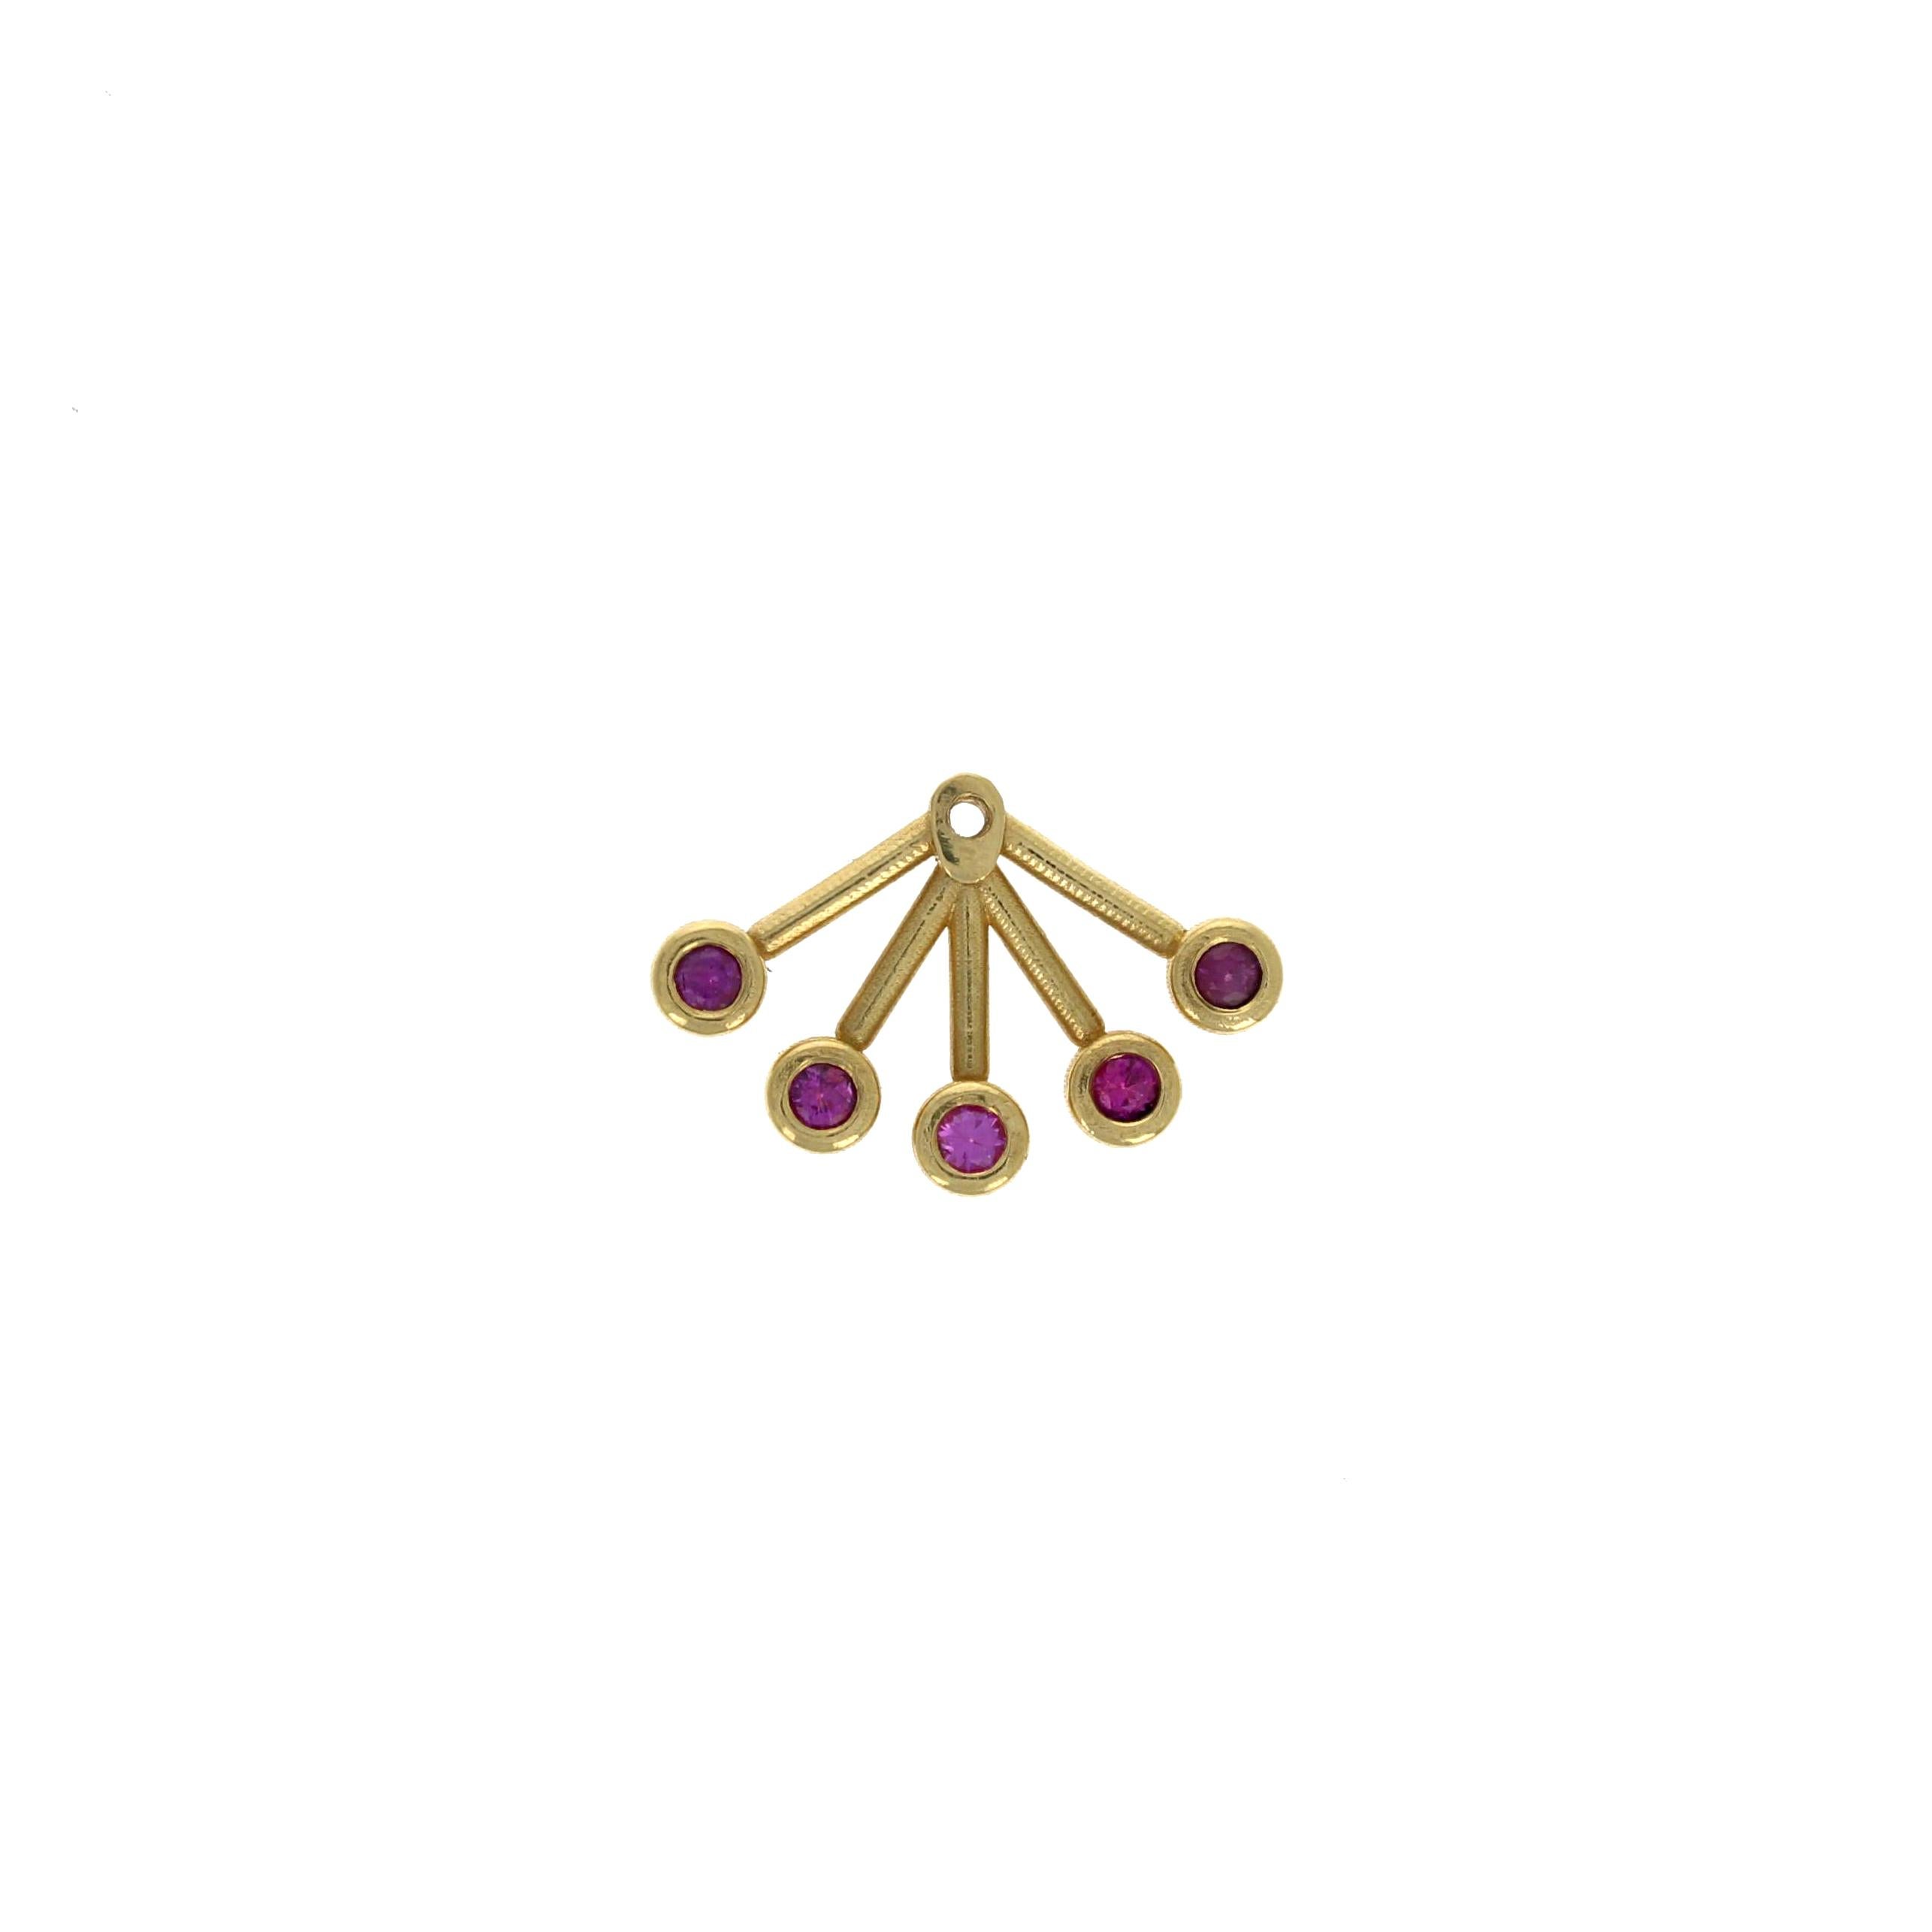 The April ear jacket is made with bright pink sapphires set in 18kt yellow gold. Add these to the backs of your favorite studs for some added color!

• 18kt yellow gold 
• Pink sapphires ~ 0.60ct TW 

Please note that due to the handmade nature,